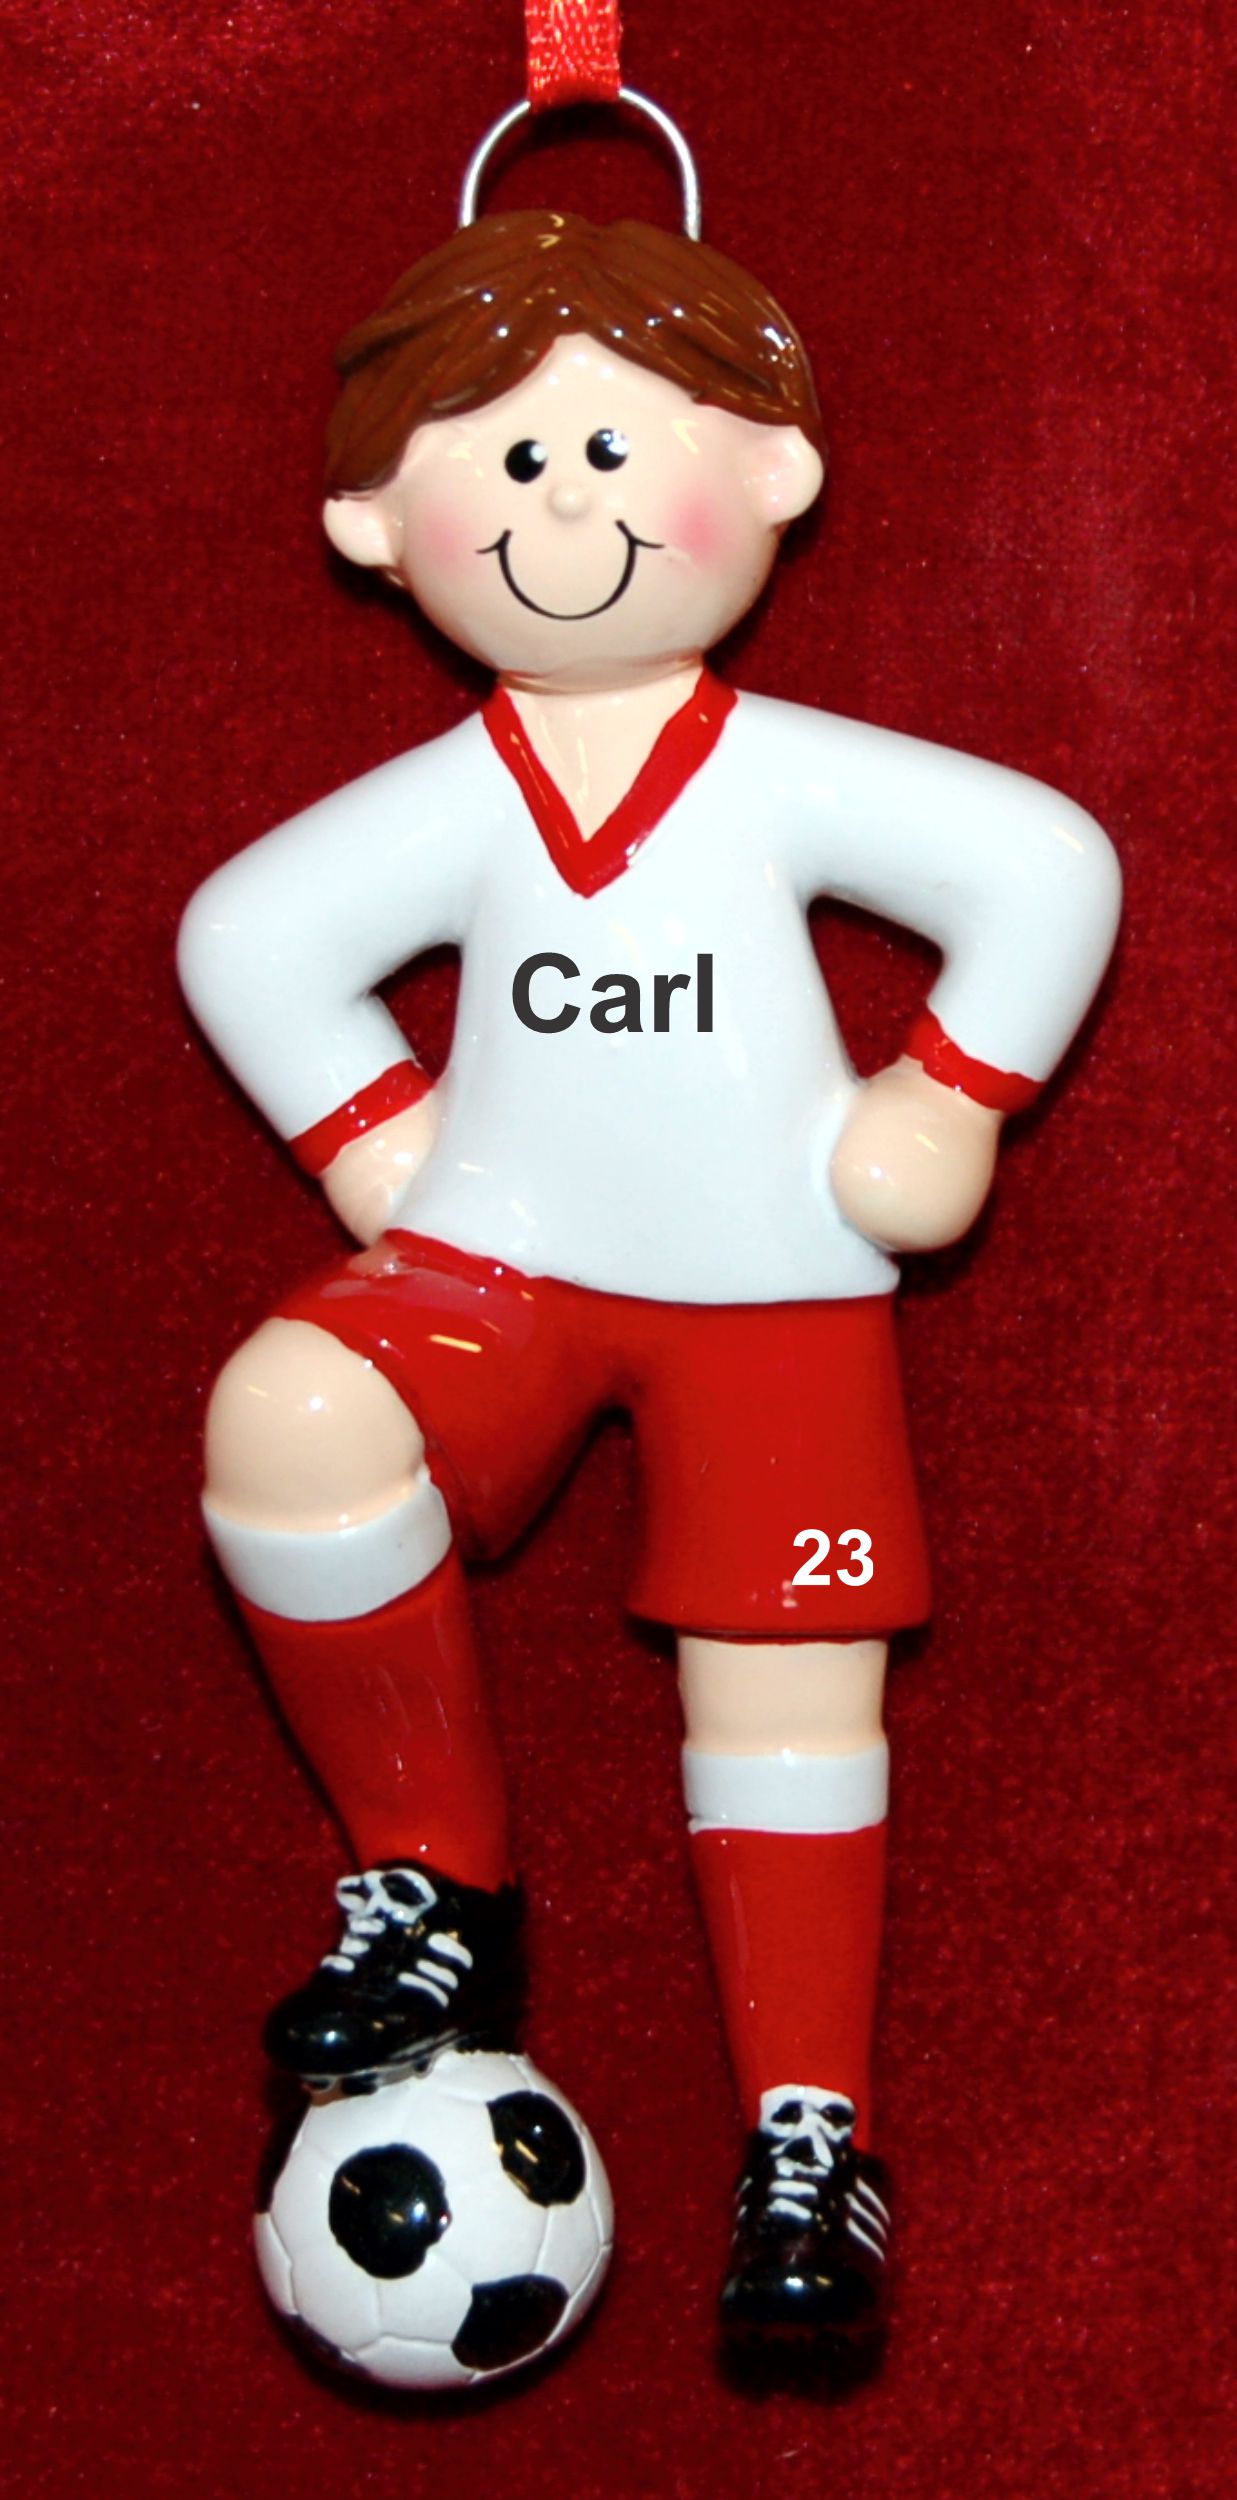 Soccer Christmas Ornament Male Brown Hair Personalized by RussellRhodes.com